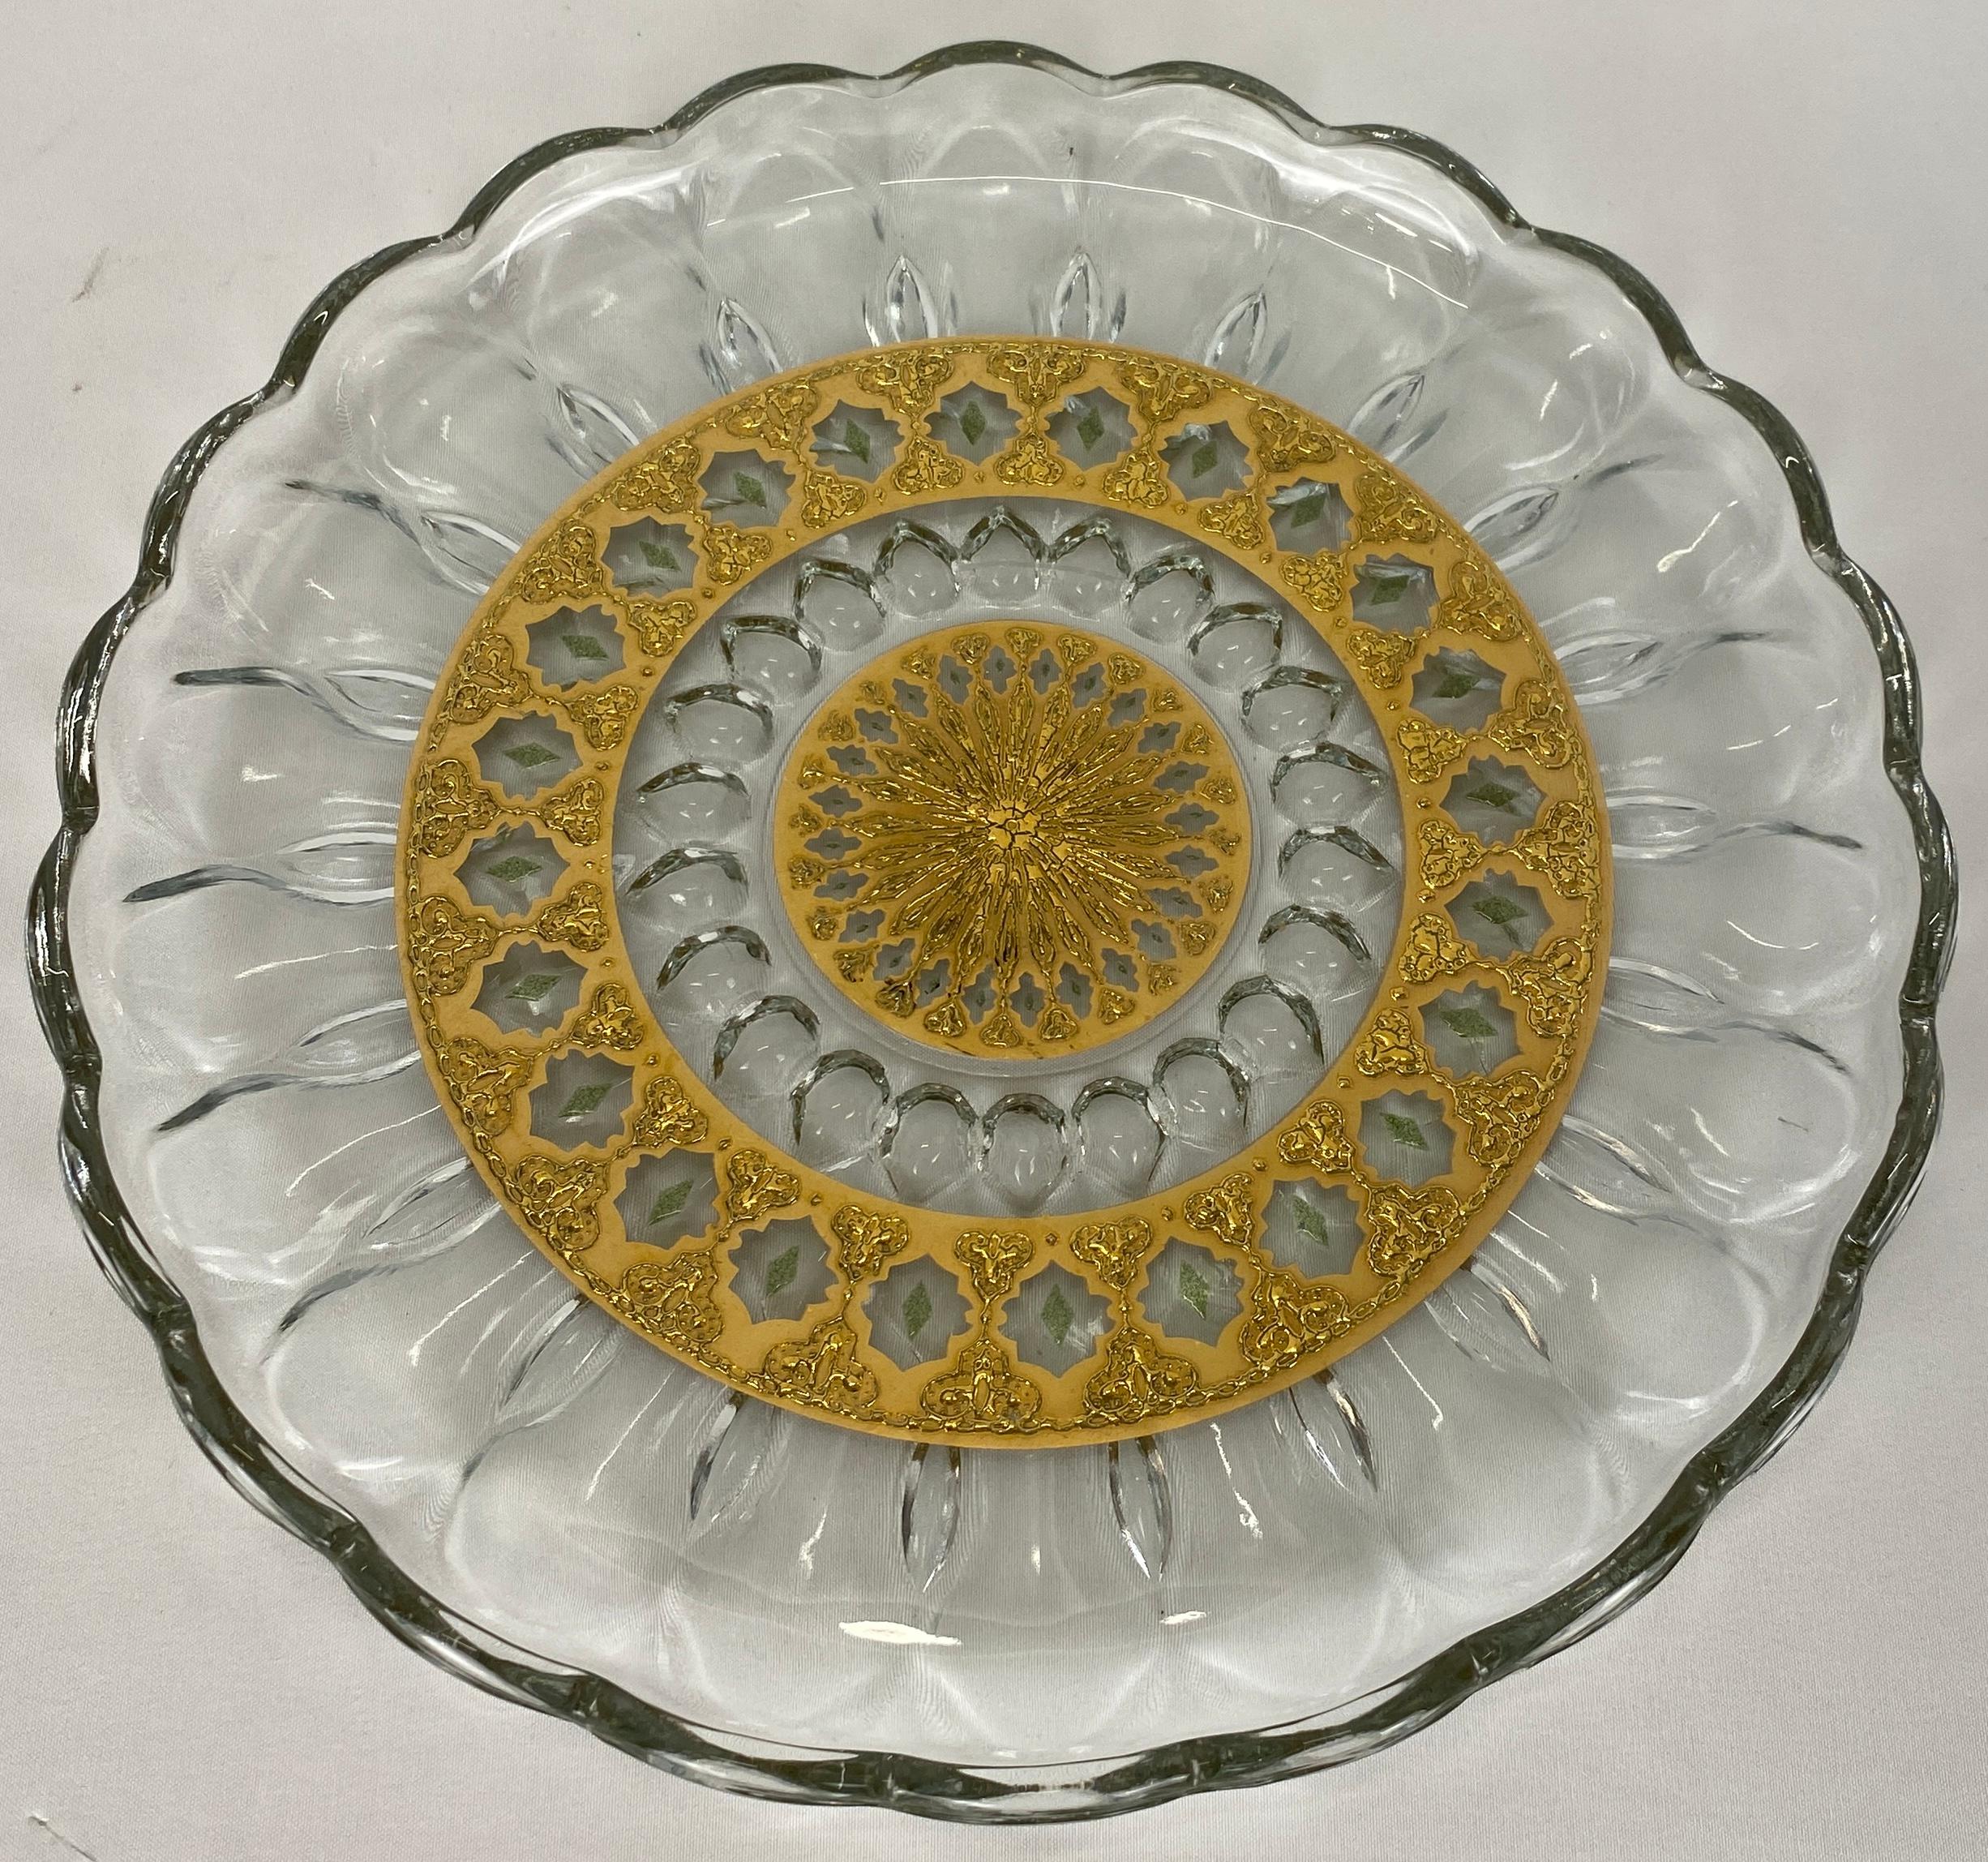 A fine quality Culver glass serving tray or platter.
Beautiful Moroccan themed design with 22-karat gold all perfect to use while serving Hors D'Oeuvres.

This highly ornate Culver glass serving tray or serving platter features 22-karat gold